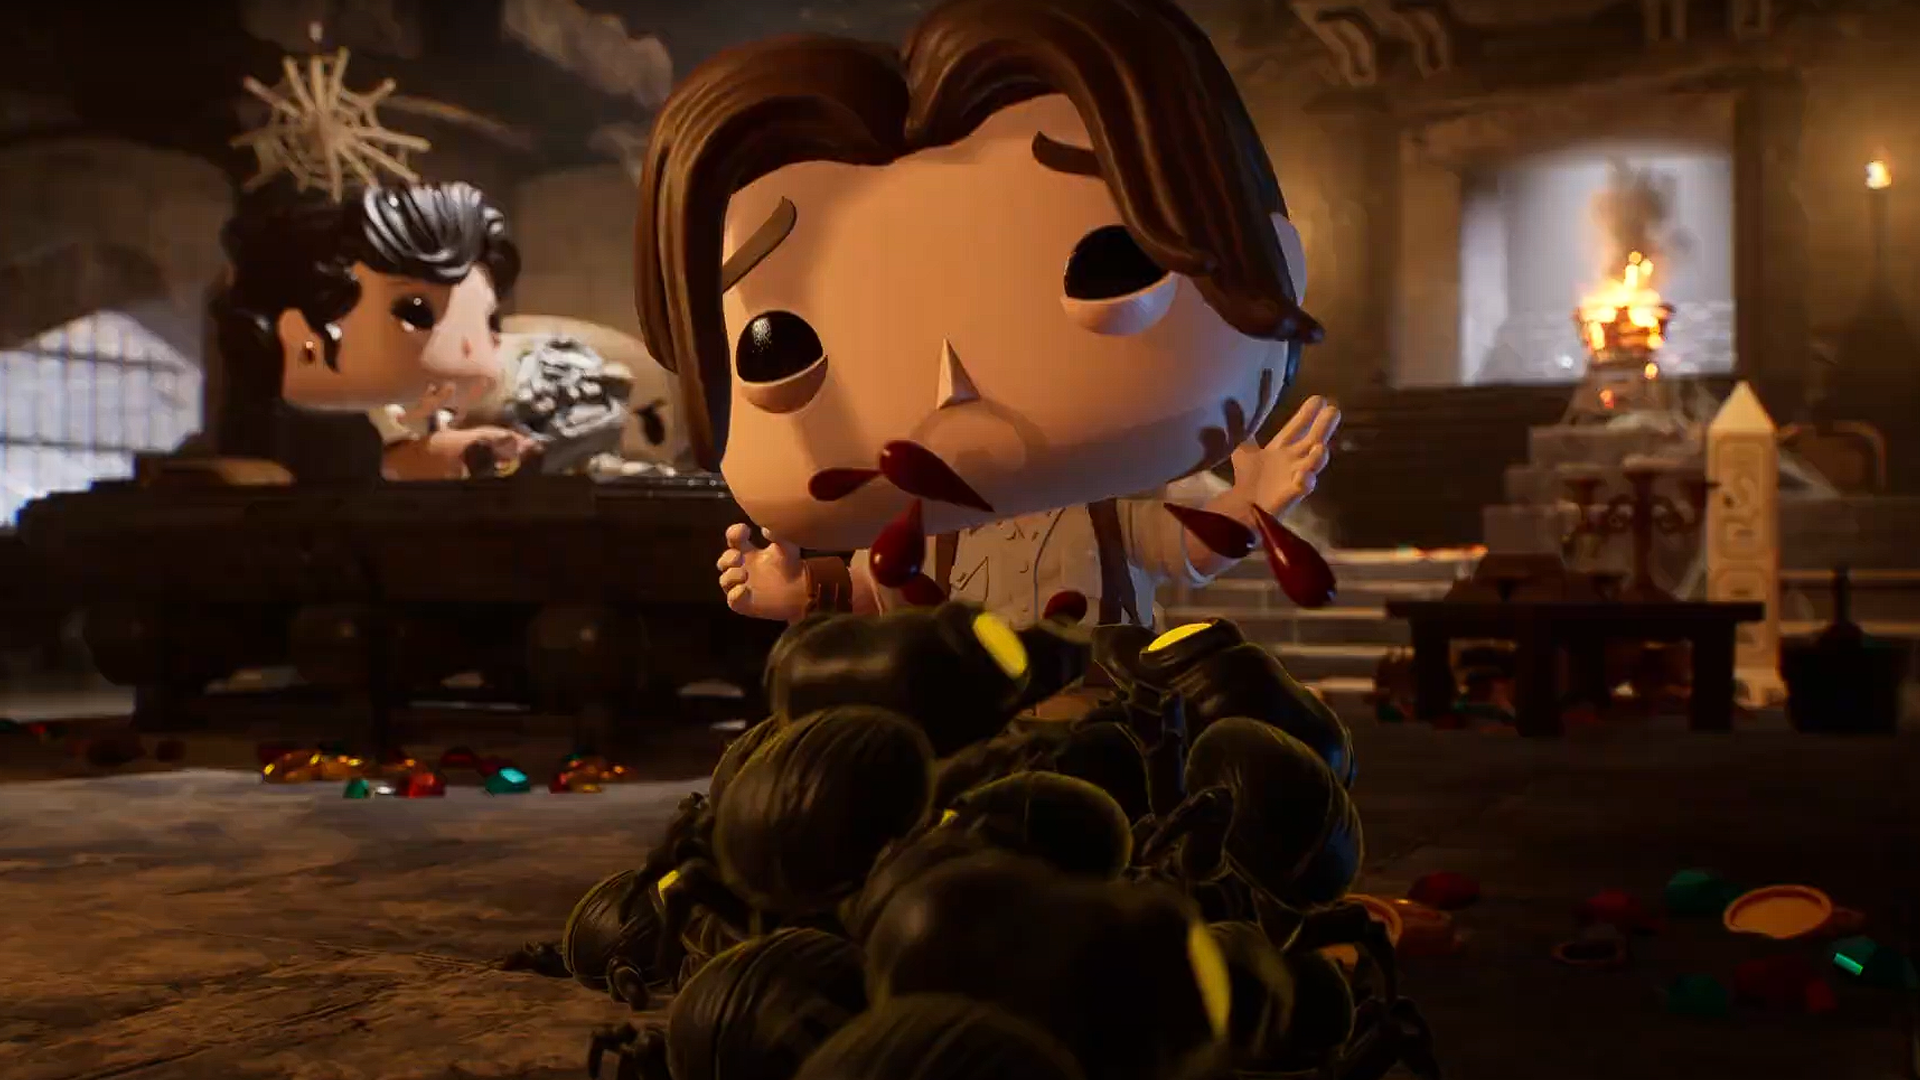 Funko Pop's co-op shooter lets you blast the heads off dead-eyed dolls from Hot Fuzz, Battlestar Galactica and more this September